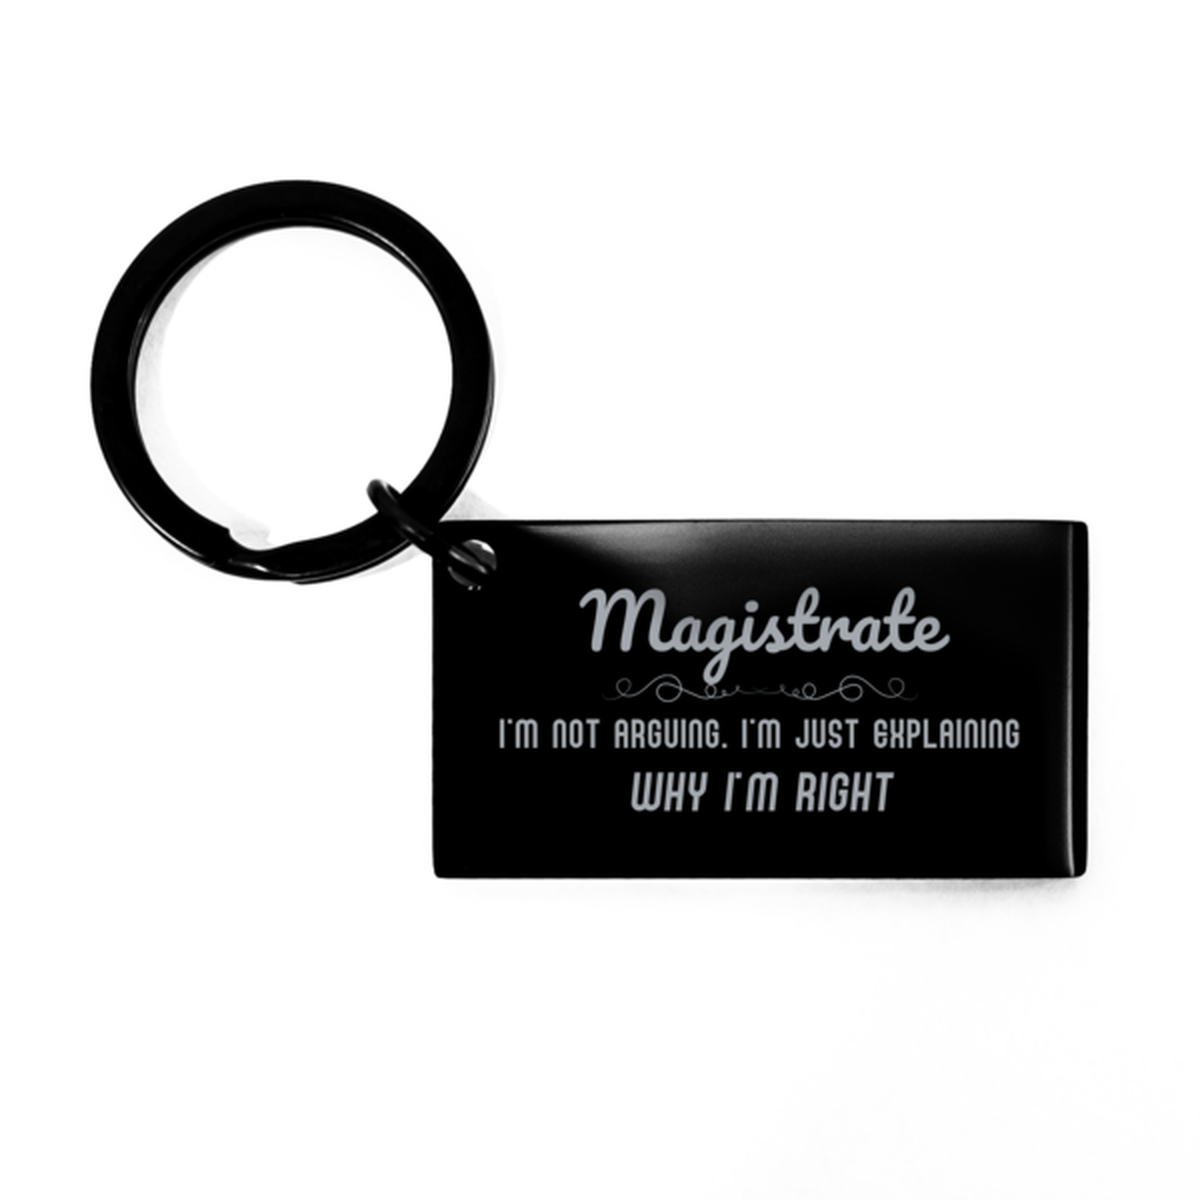 Magistrate I'm not Arguing. I'm Just Explaining Why I'm RIGHT Keychain, Funny Saying Quote Magistrate Gifts For Magistrate Graduation Birthday Christmas Gifts for Men Women Coworker